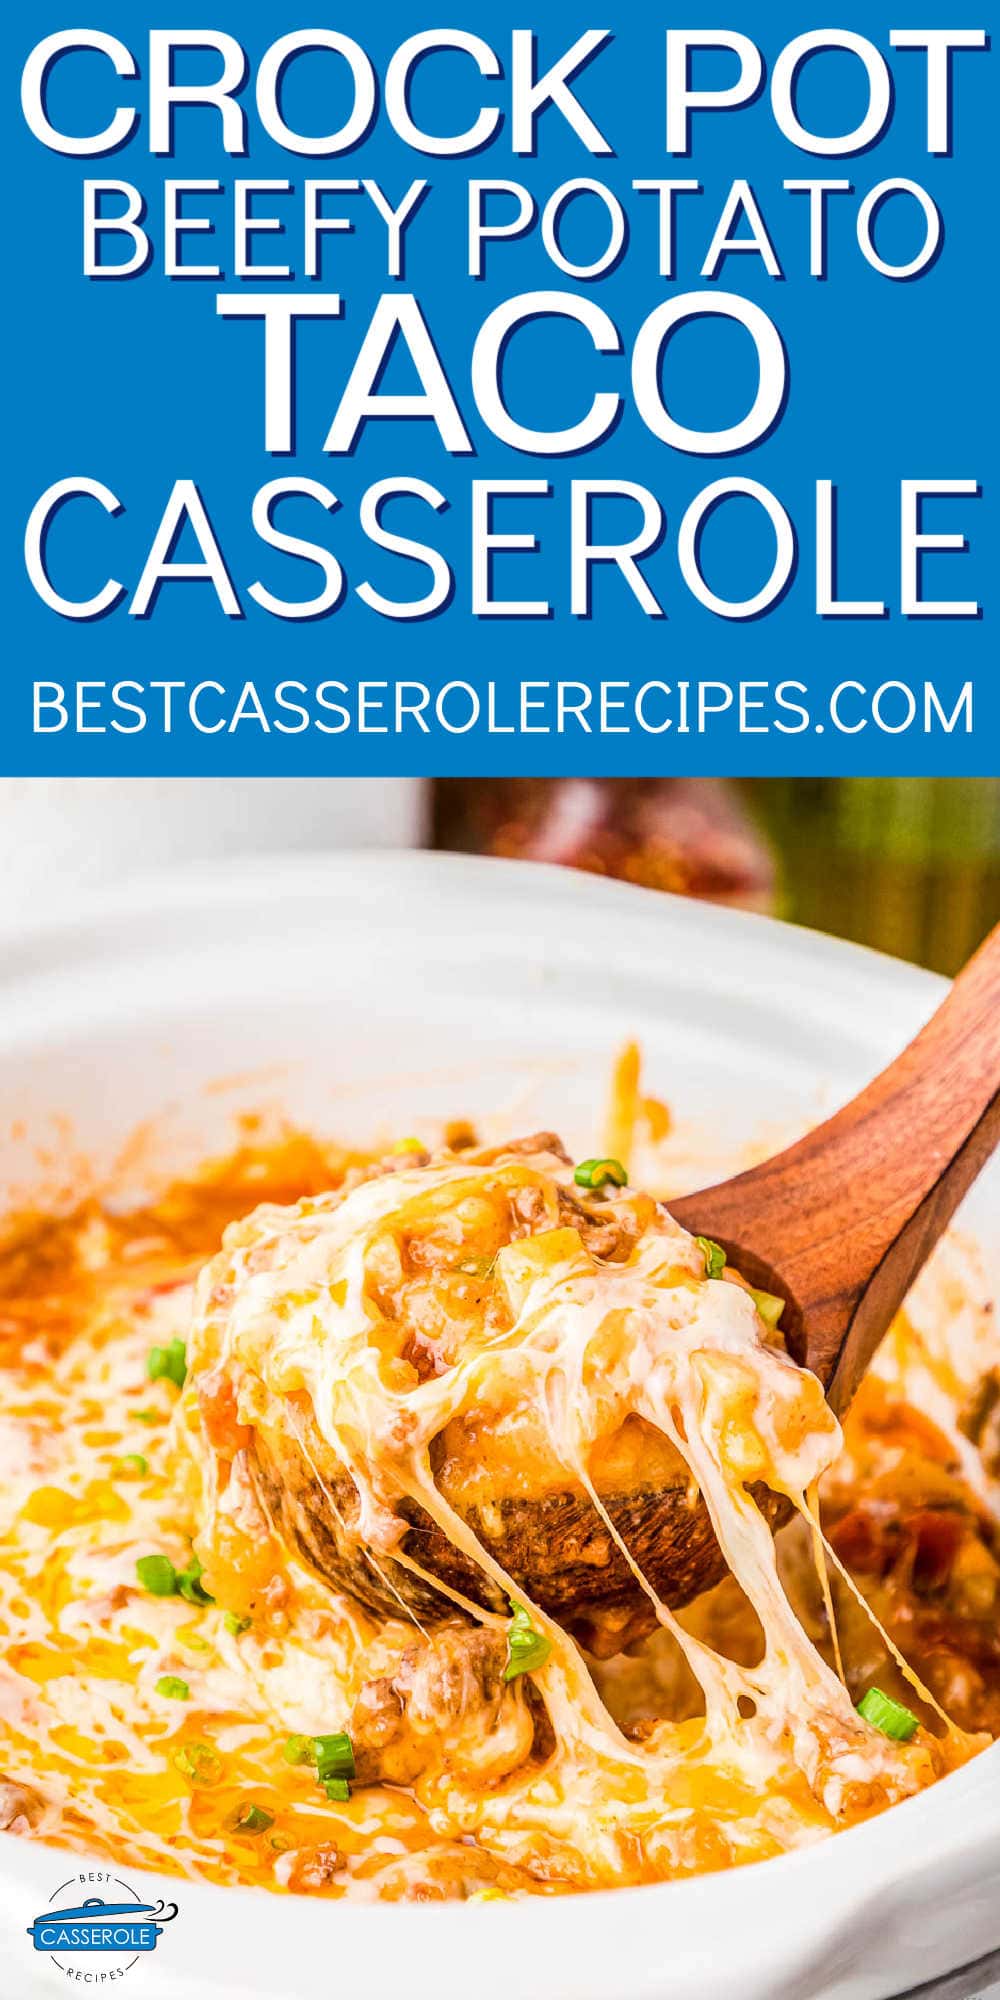 scoop of cheesy casserole with blue banner and white text